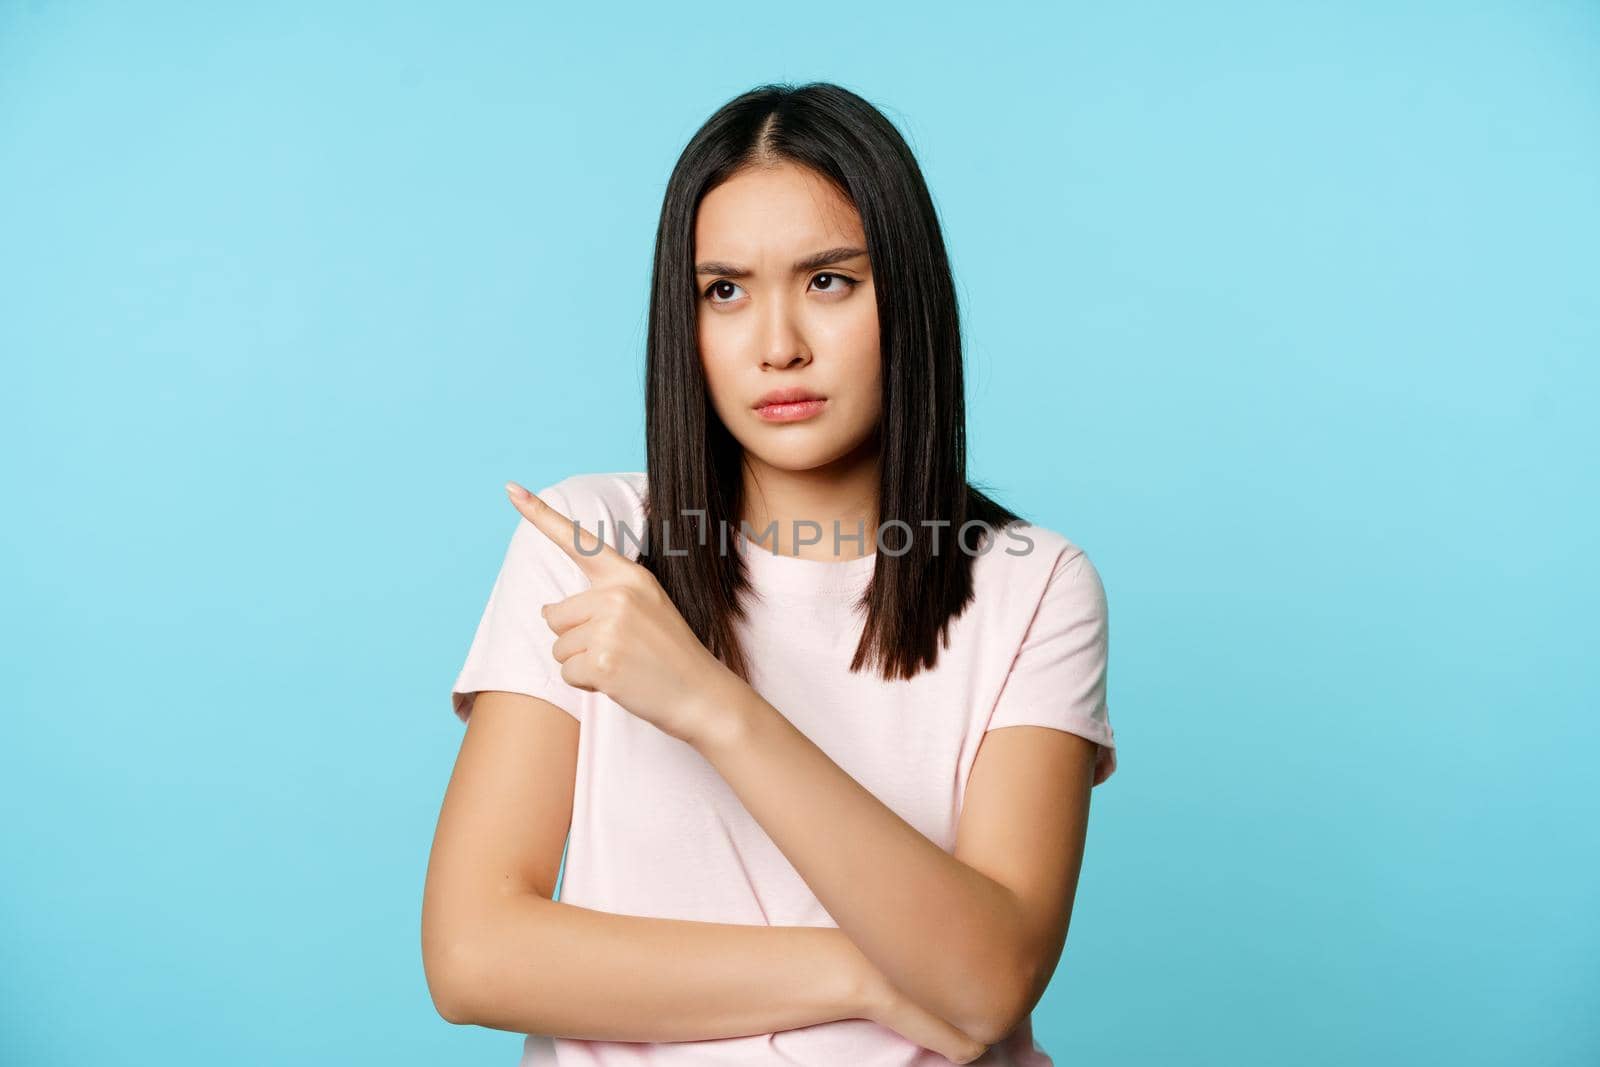 Angry asian woman sulking, frowning upset, pointing fingers at upper left corner, standing in t-shirt over blue background.